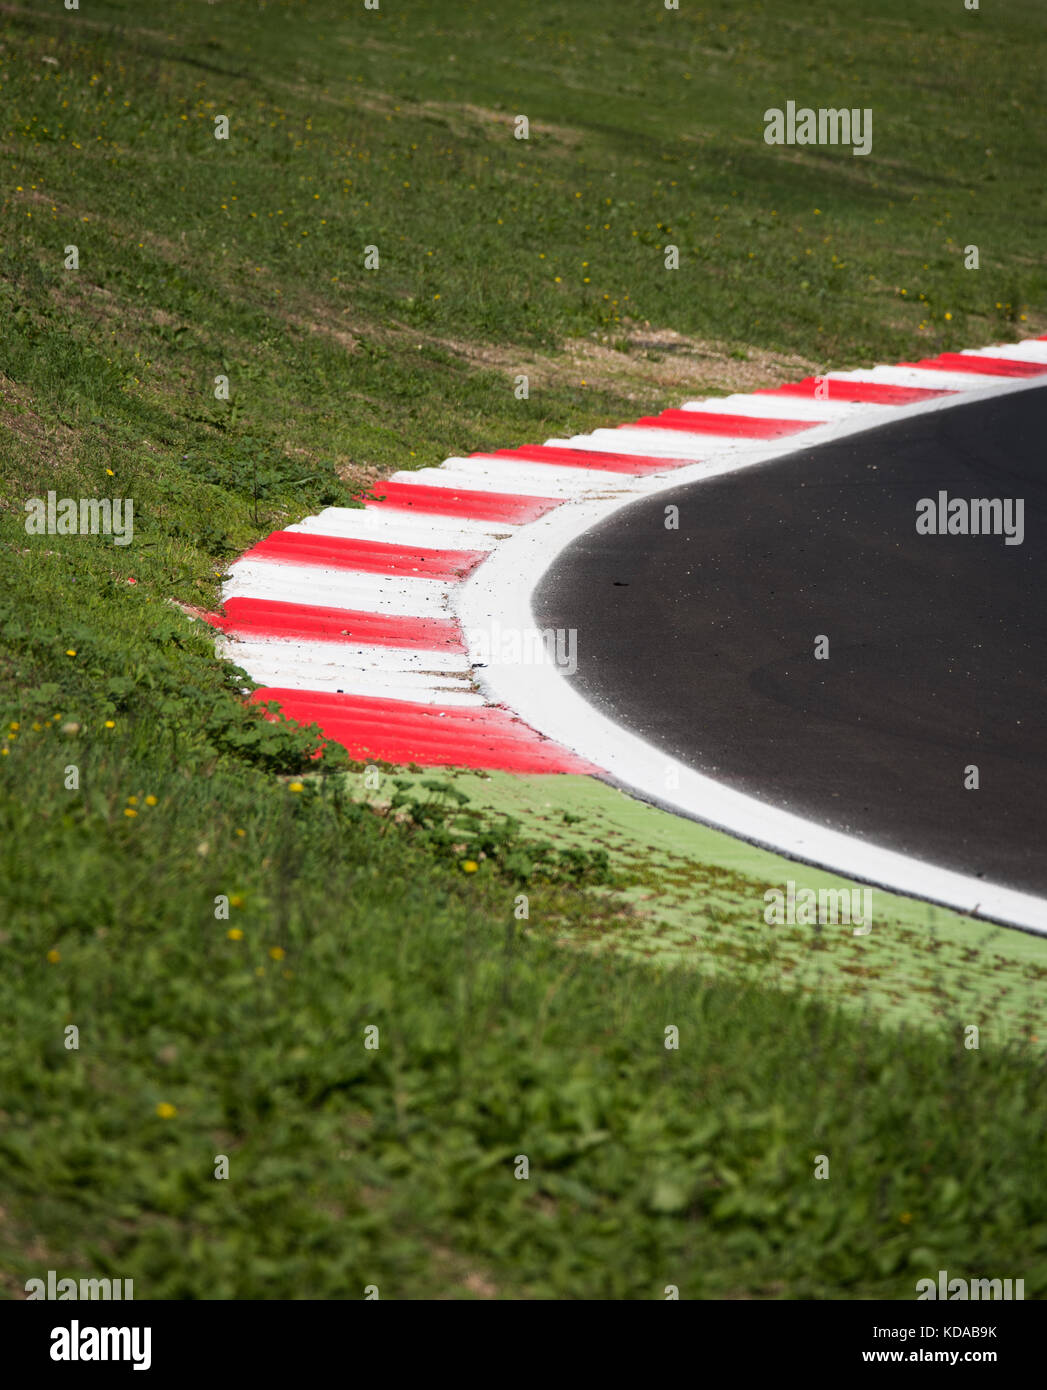 Concept of borderline, boundary, limit. Motorsport racing asphalt track round with red curb detail Stock Photo